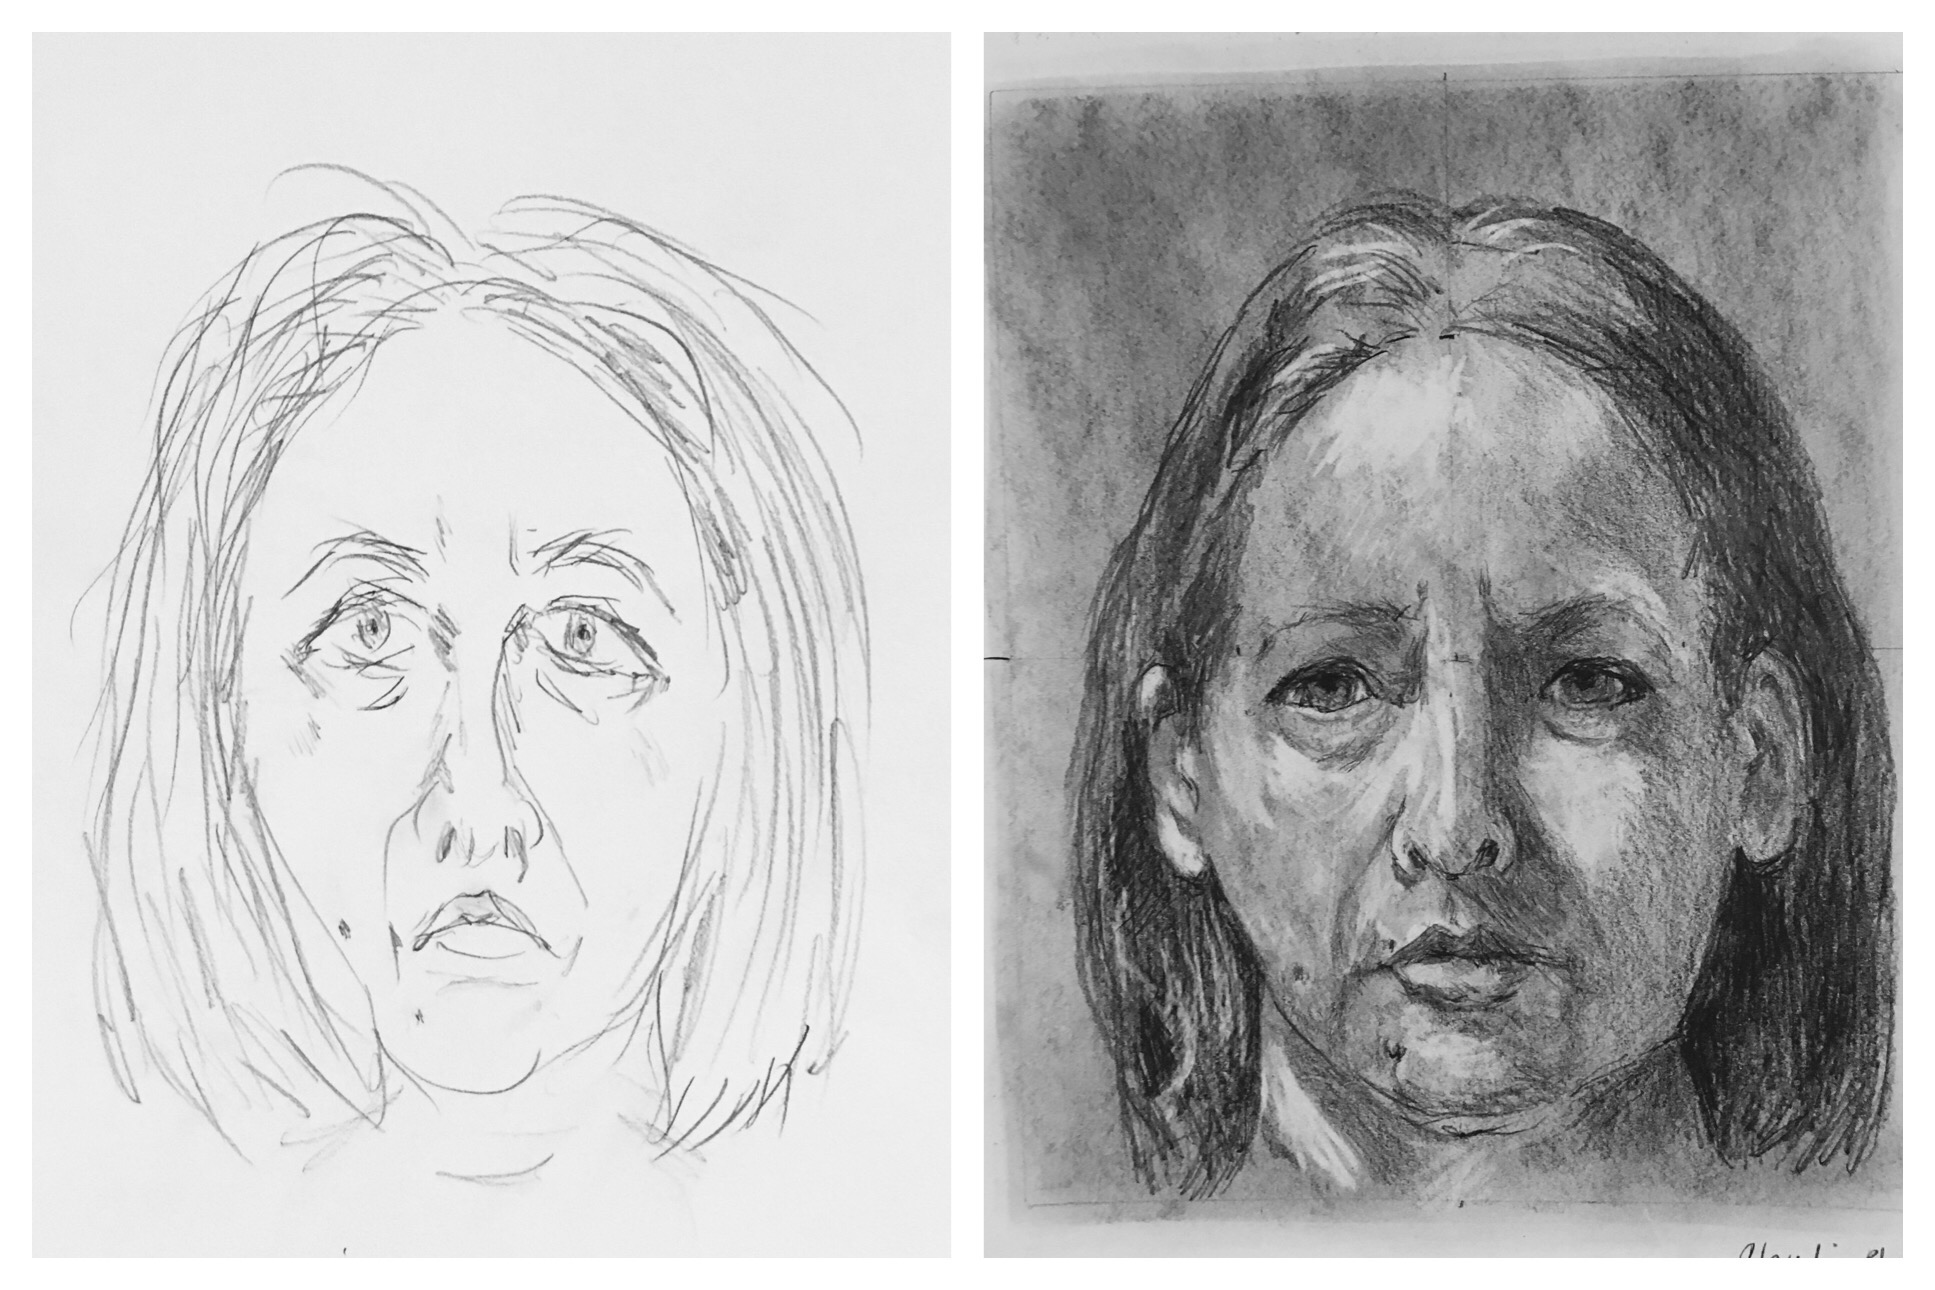 C's Before and After Self-Portraits August 2018 